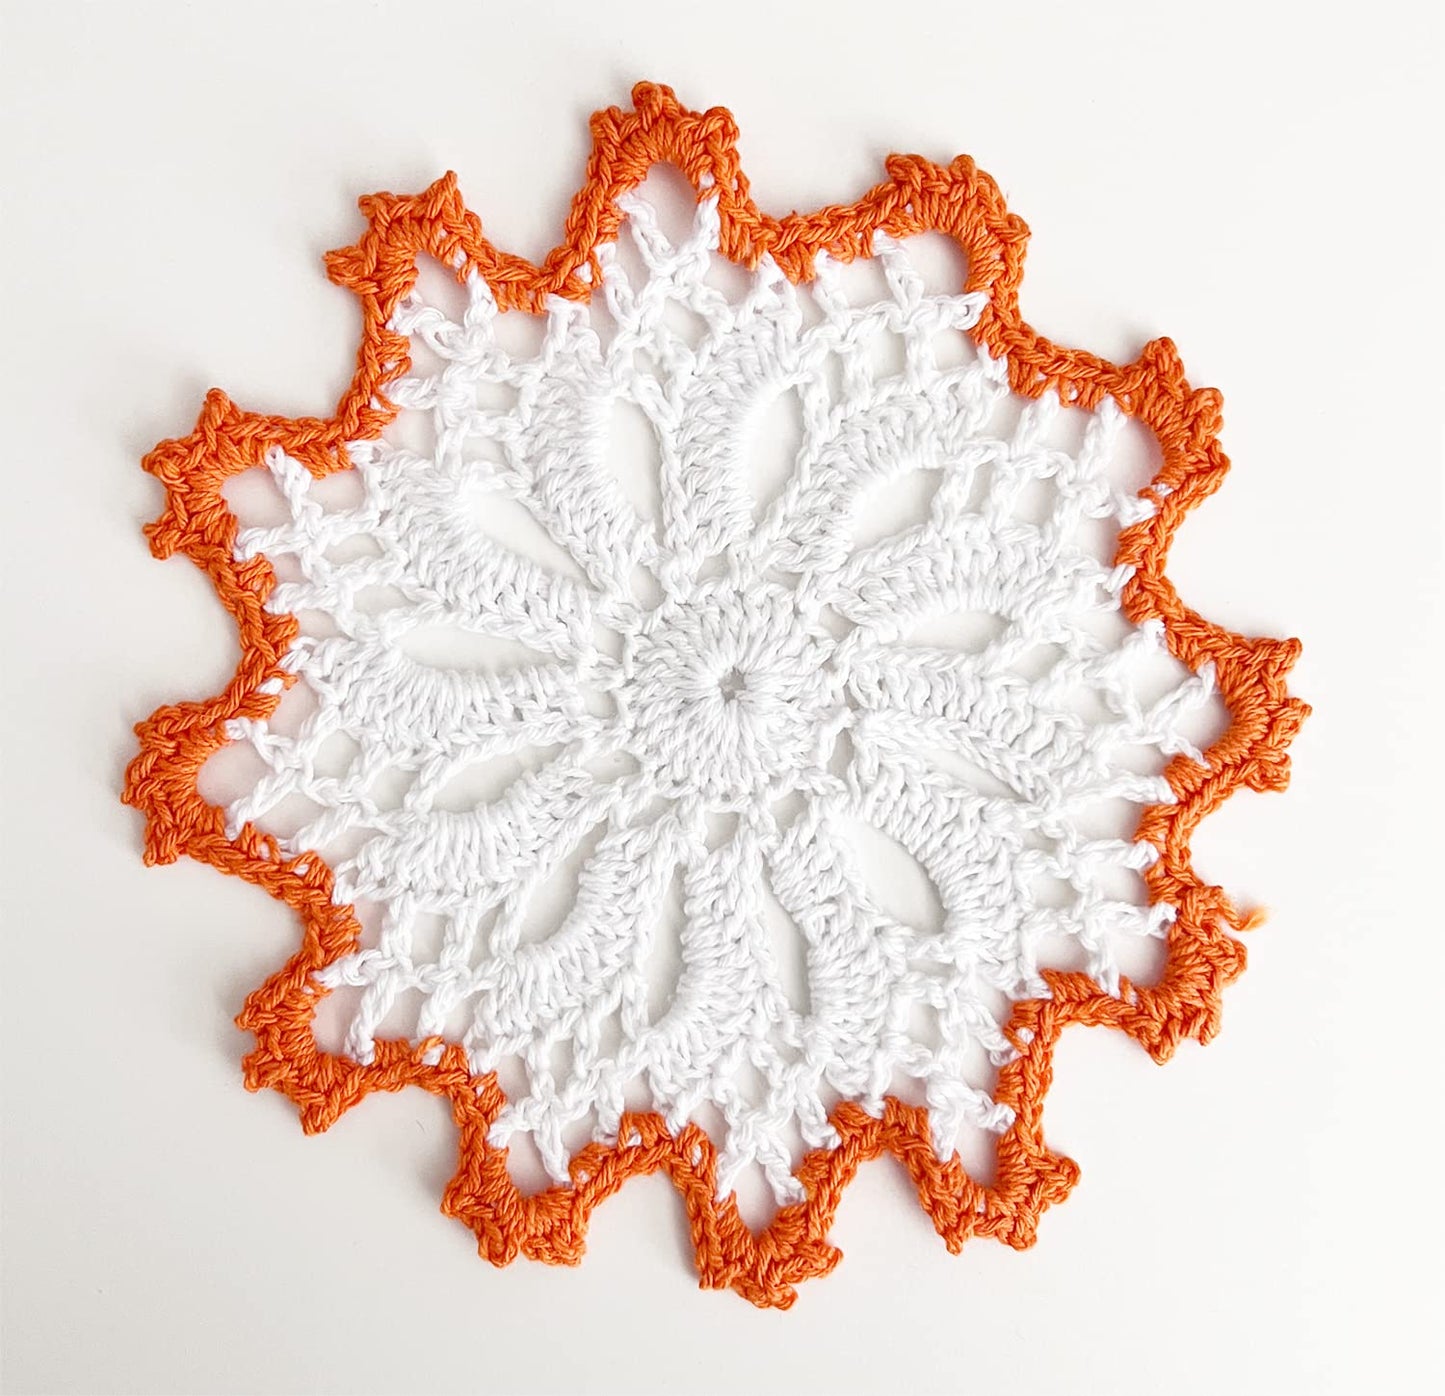 Fennco Styles Handmade Crochet Cotton Whirlwind Two-Tone Doily 6-Inch Round, 2-Piece - Drink Coaster for Everyday Use, Holiday, Farmhouse Décor, Cocktail, Tea Party, Special Occasion